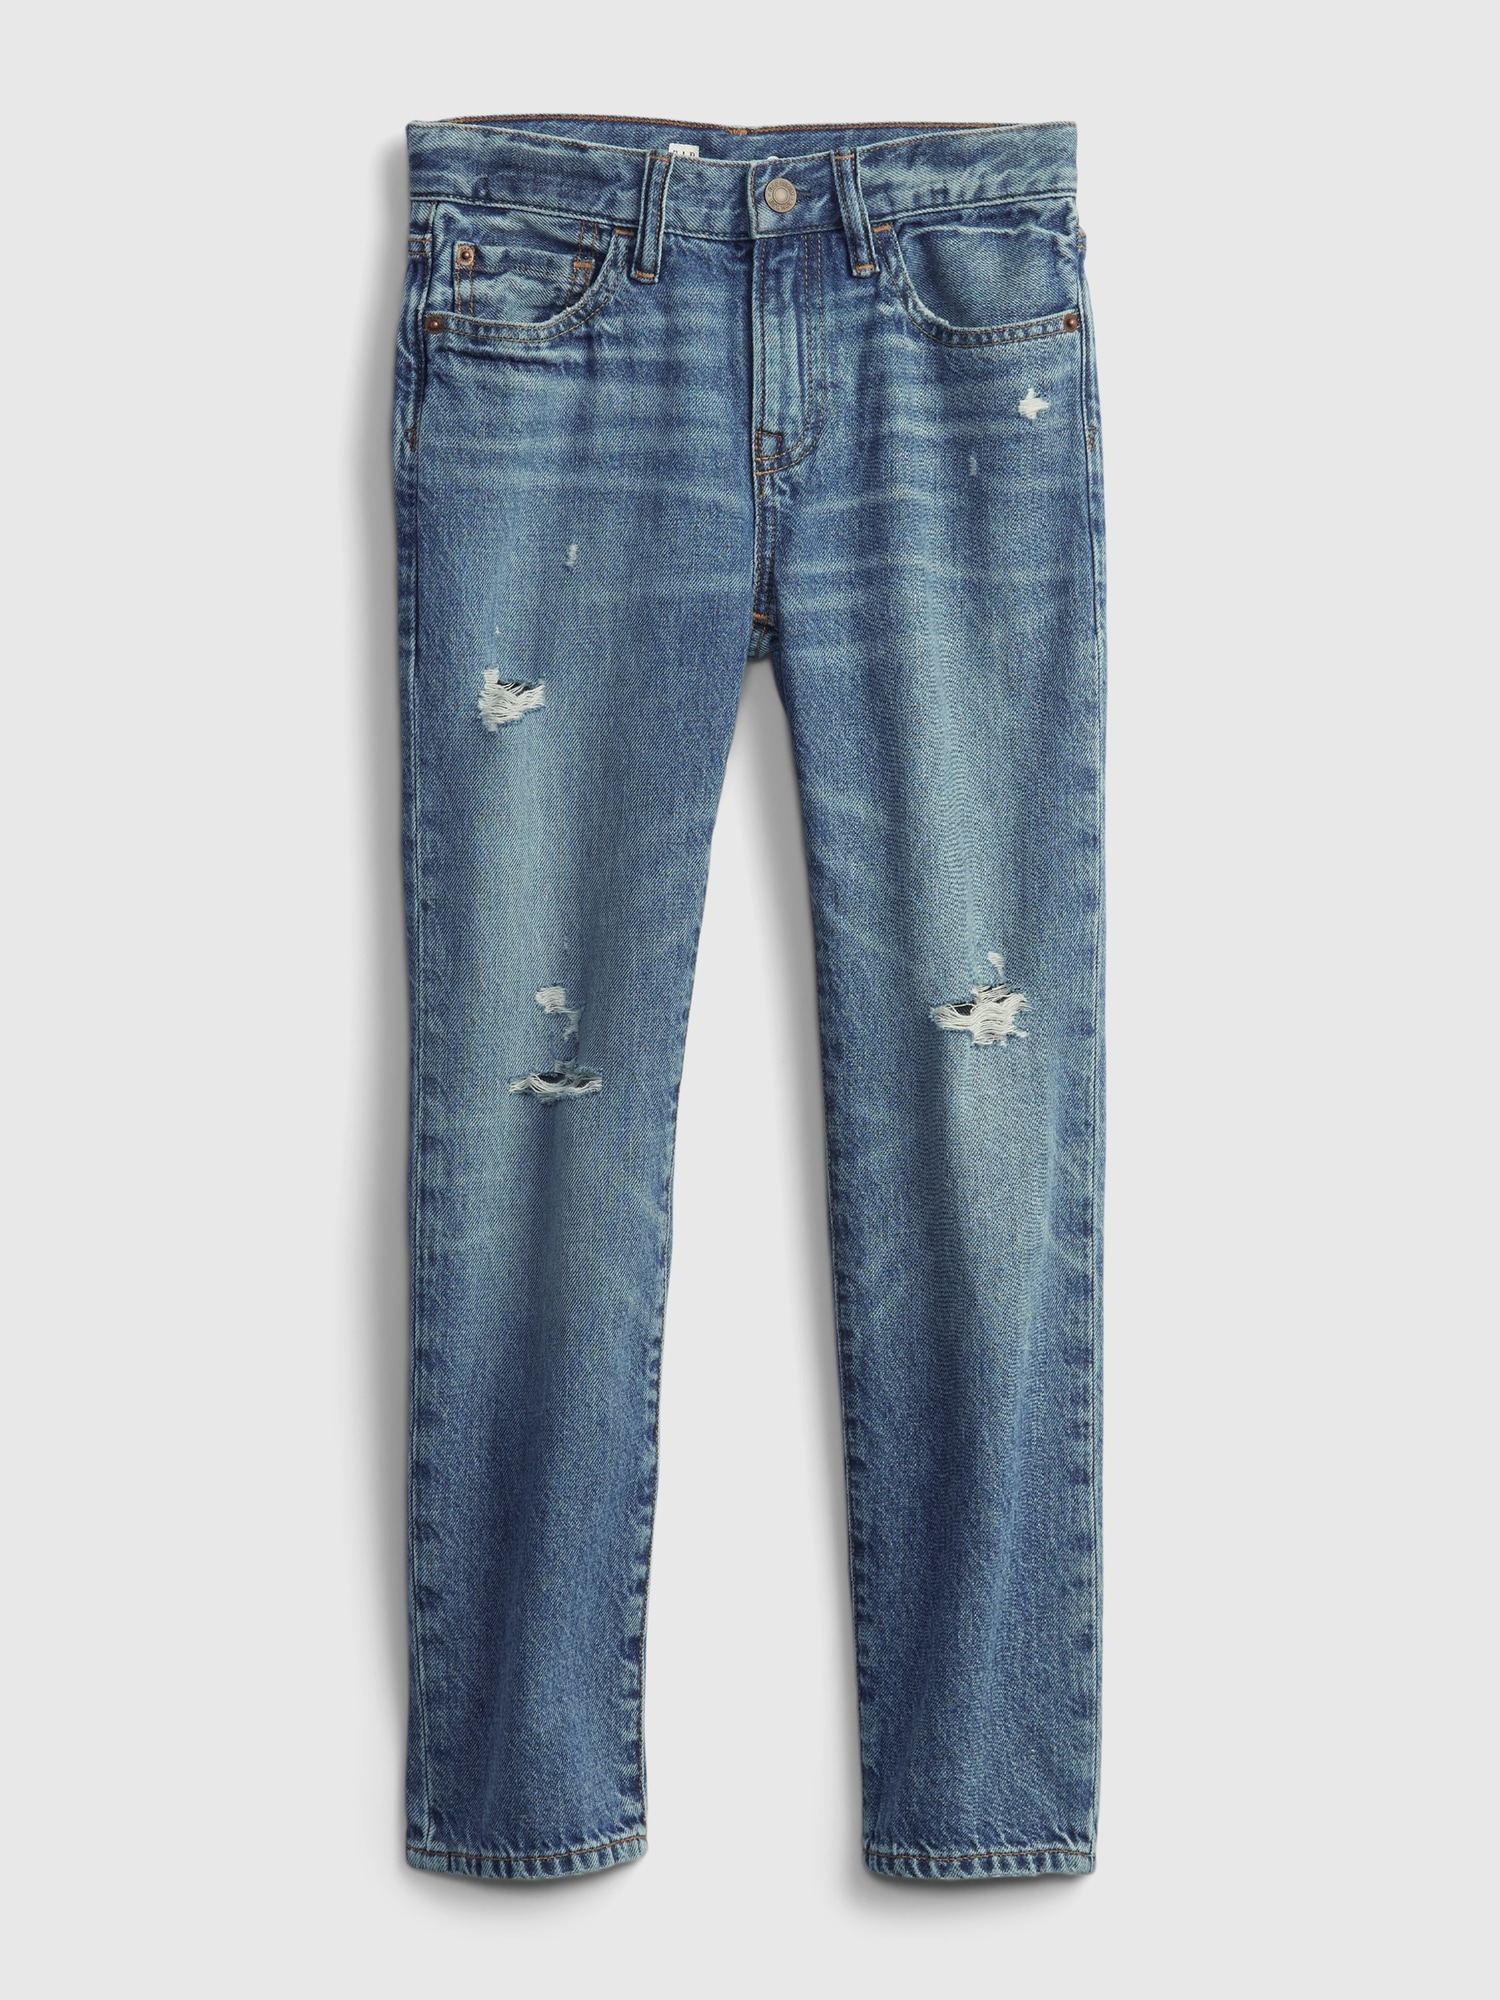 Kids Original Fit Jeans with Washwell™ | Gap